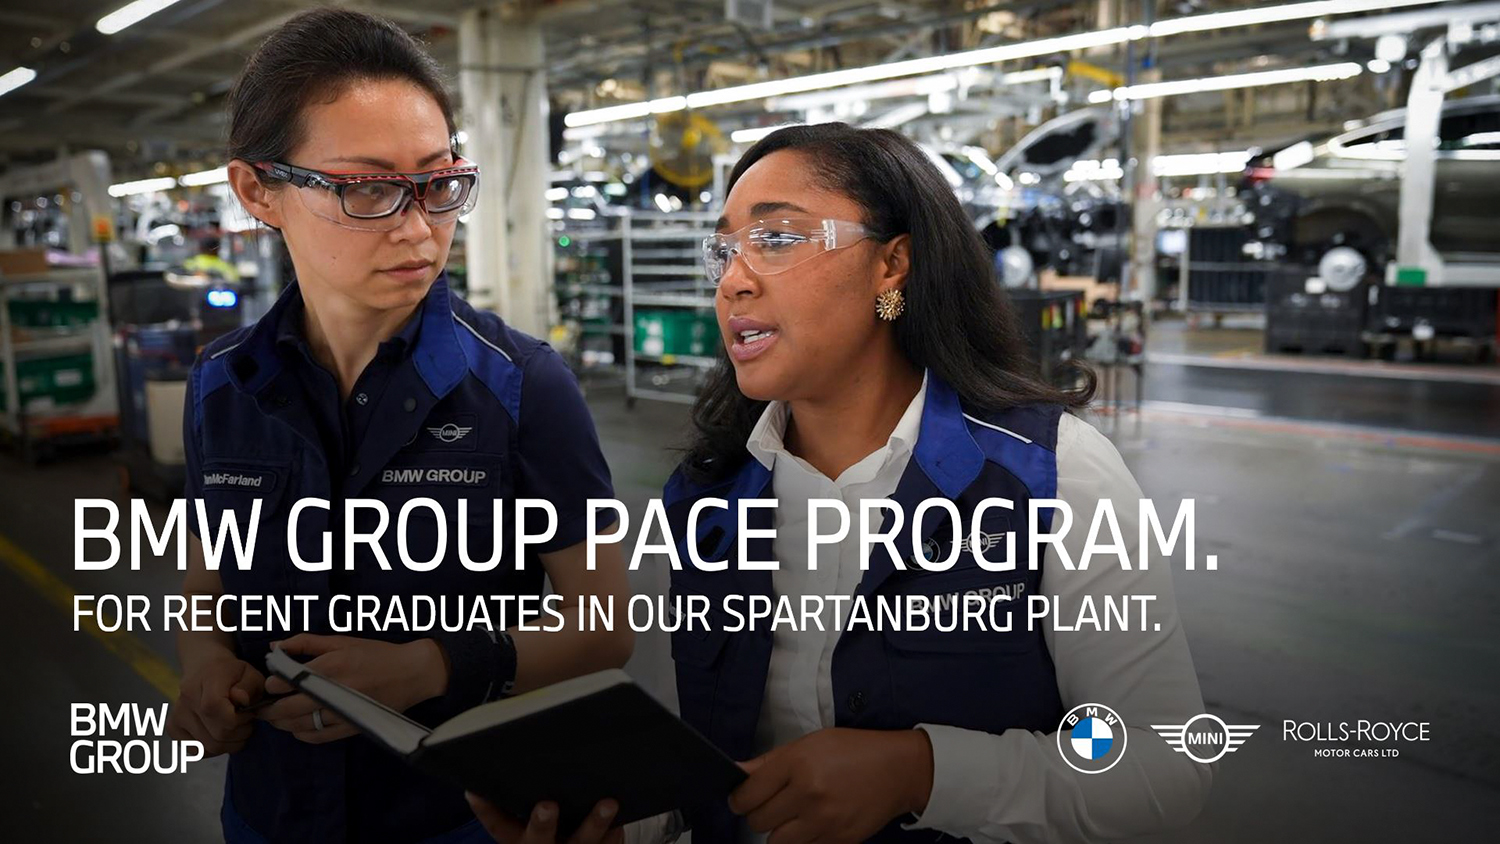 Video about the PACE program.